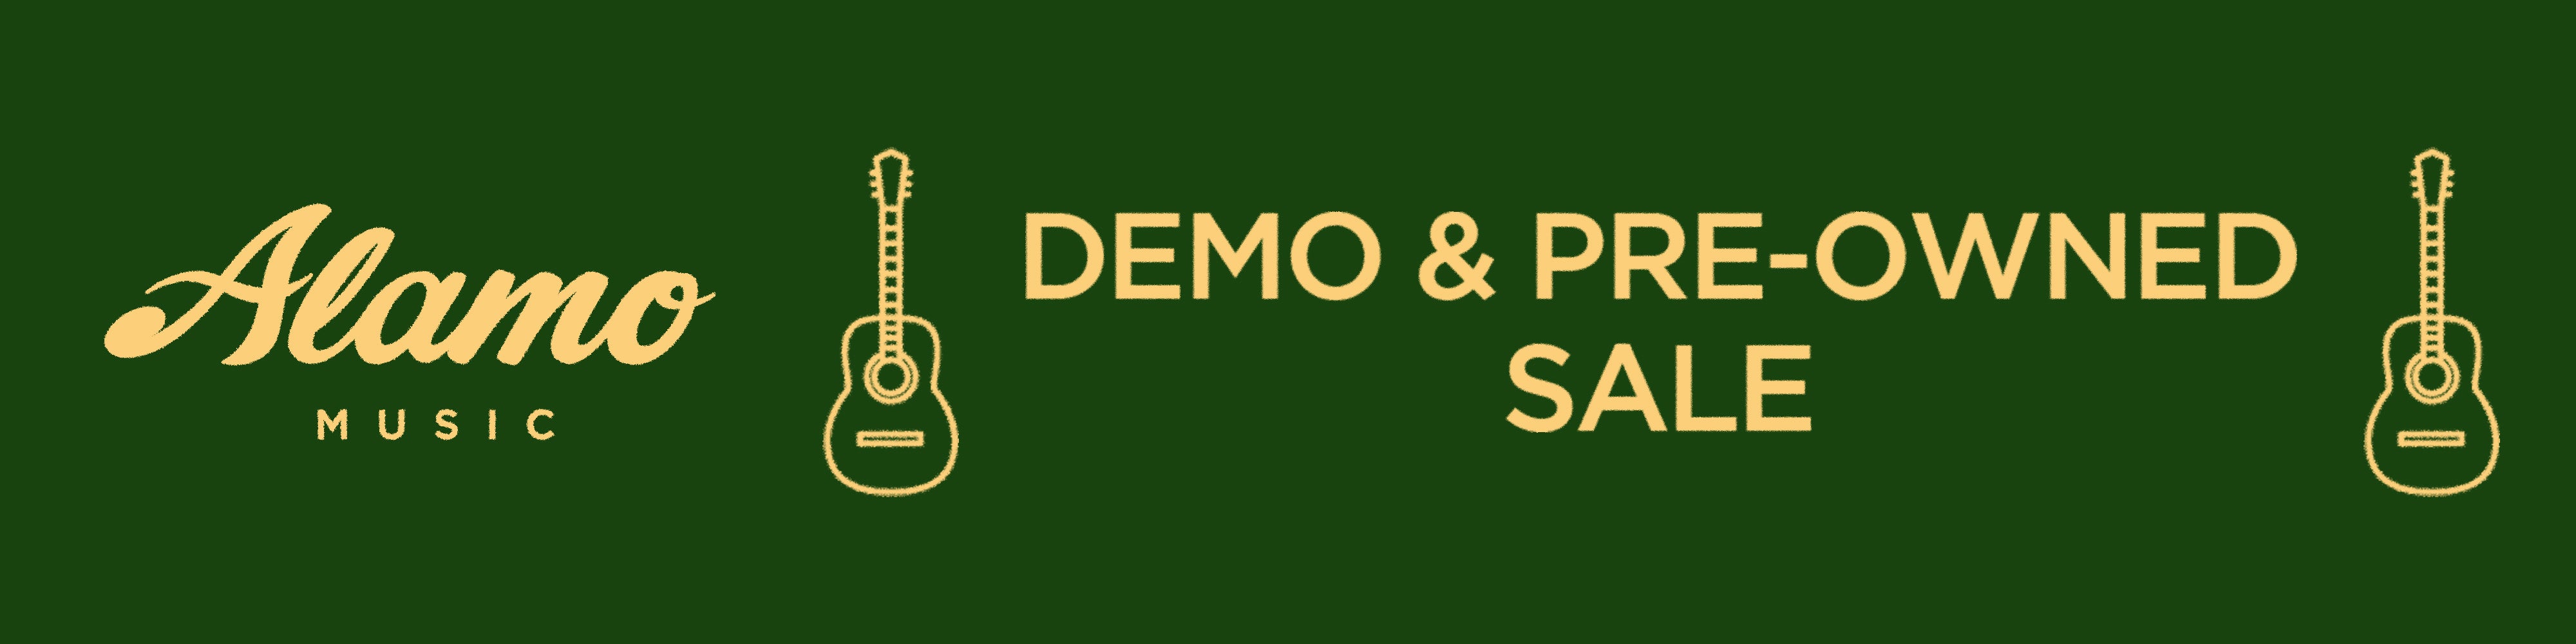 Demo & Pre-Owned Sale